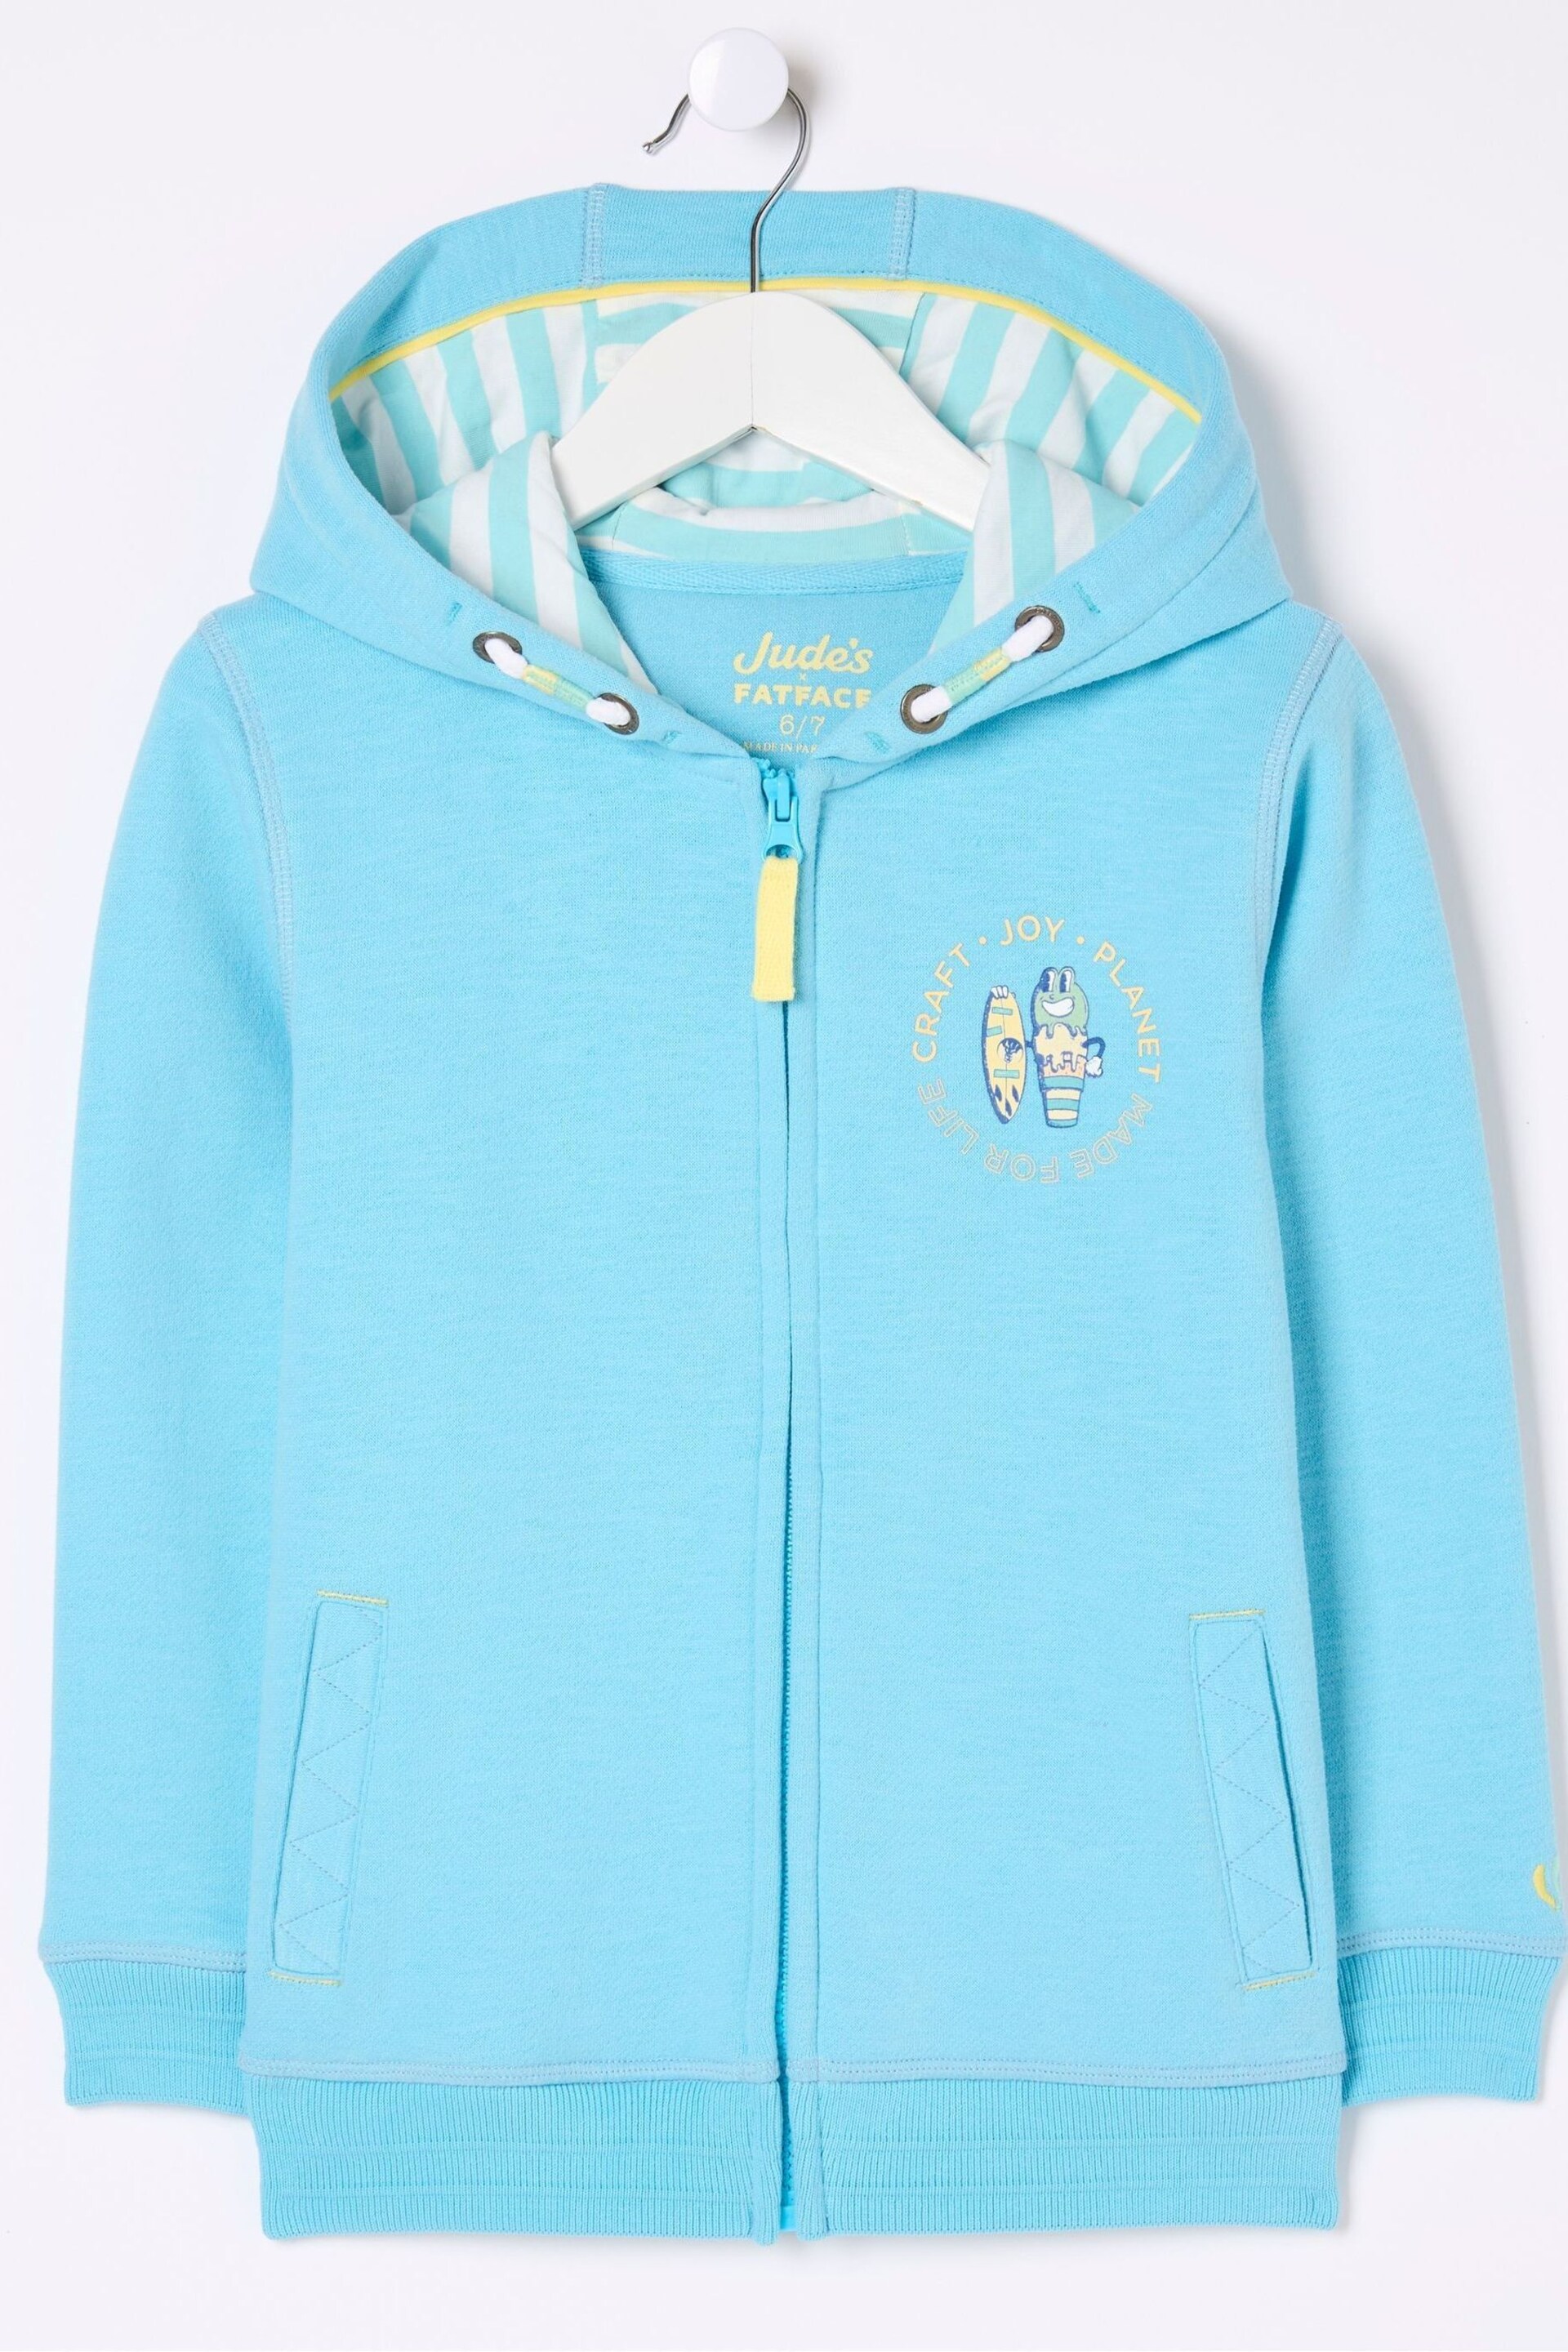 FatFace Blue Judes Zip Through Hoodie - Image 1 of 2